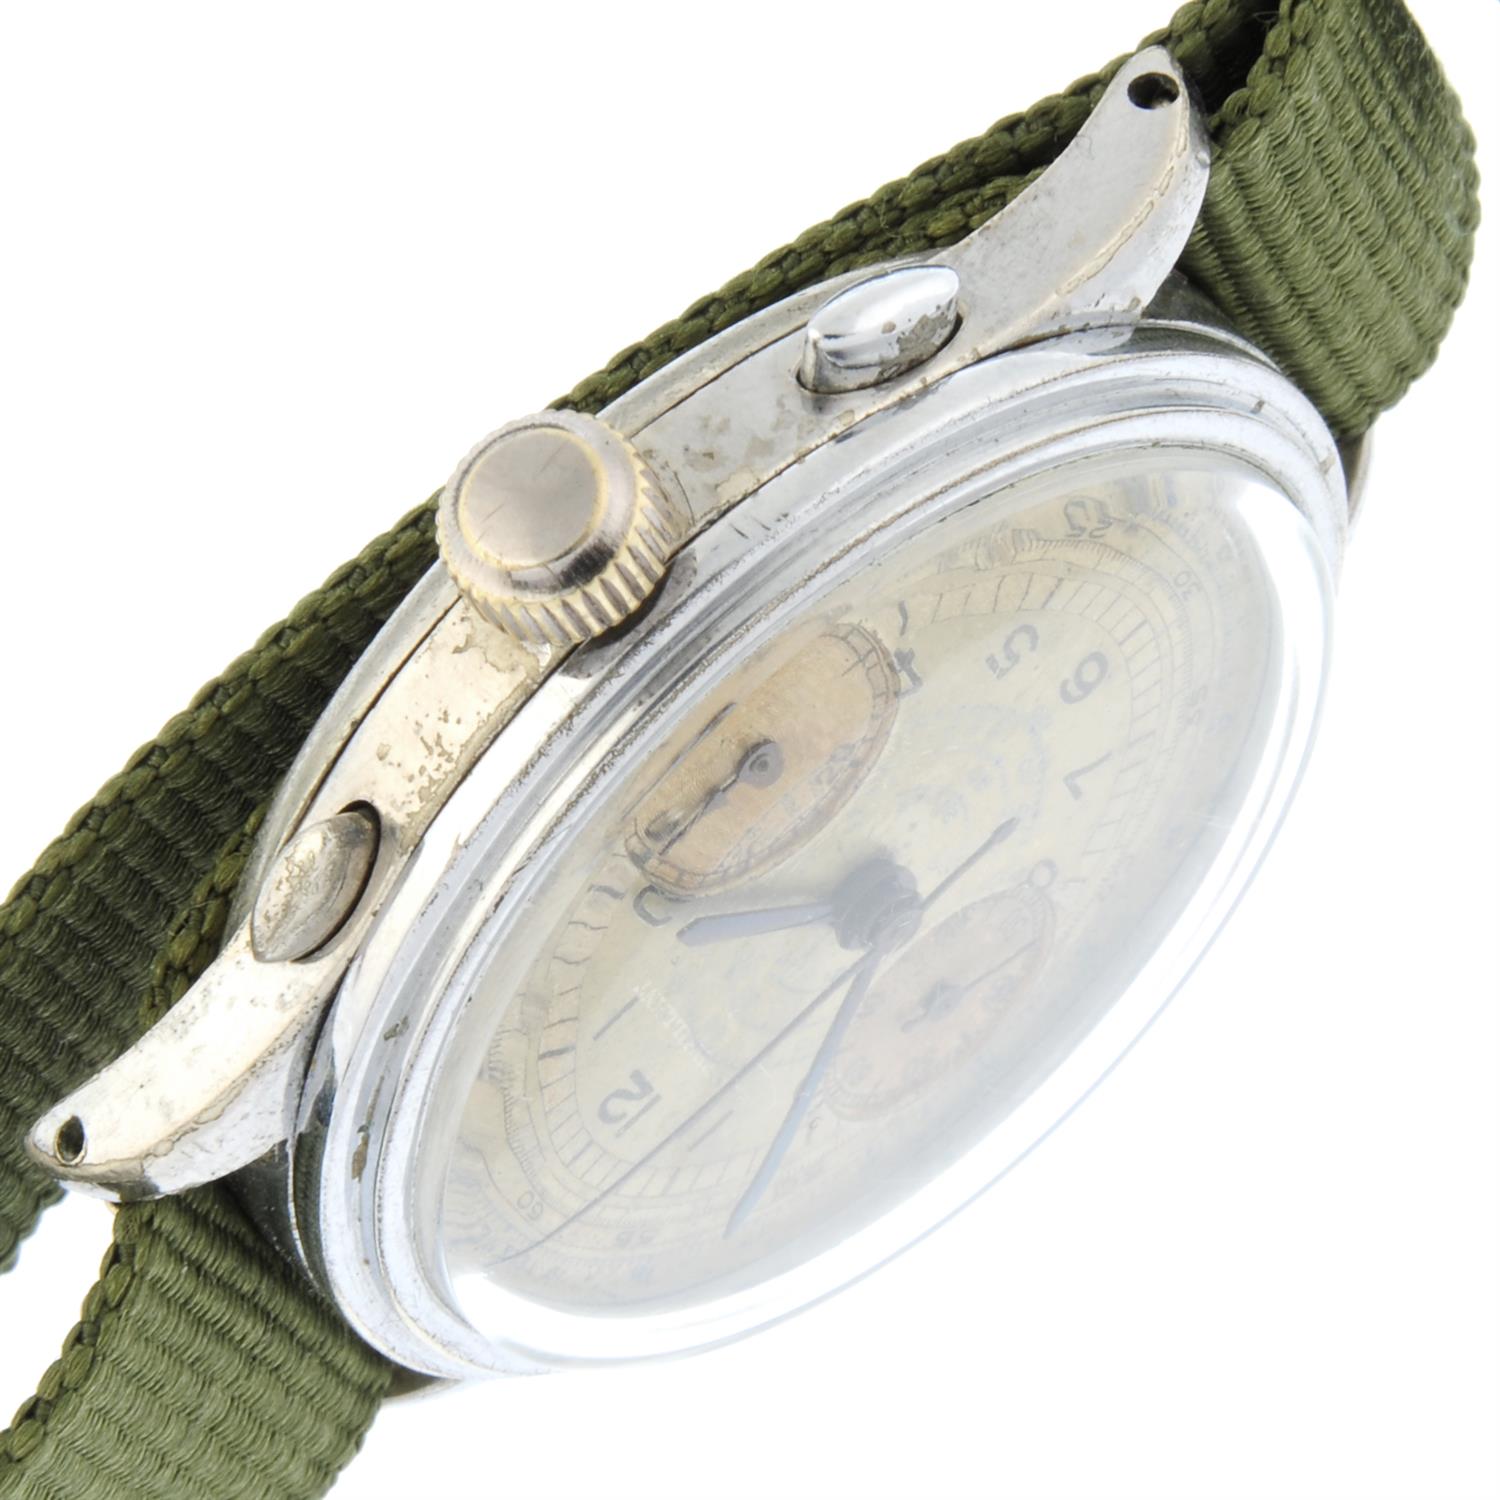 Montbrillant - a chronograph watch, 37mm. - Image 3 of 4